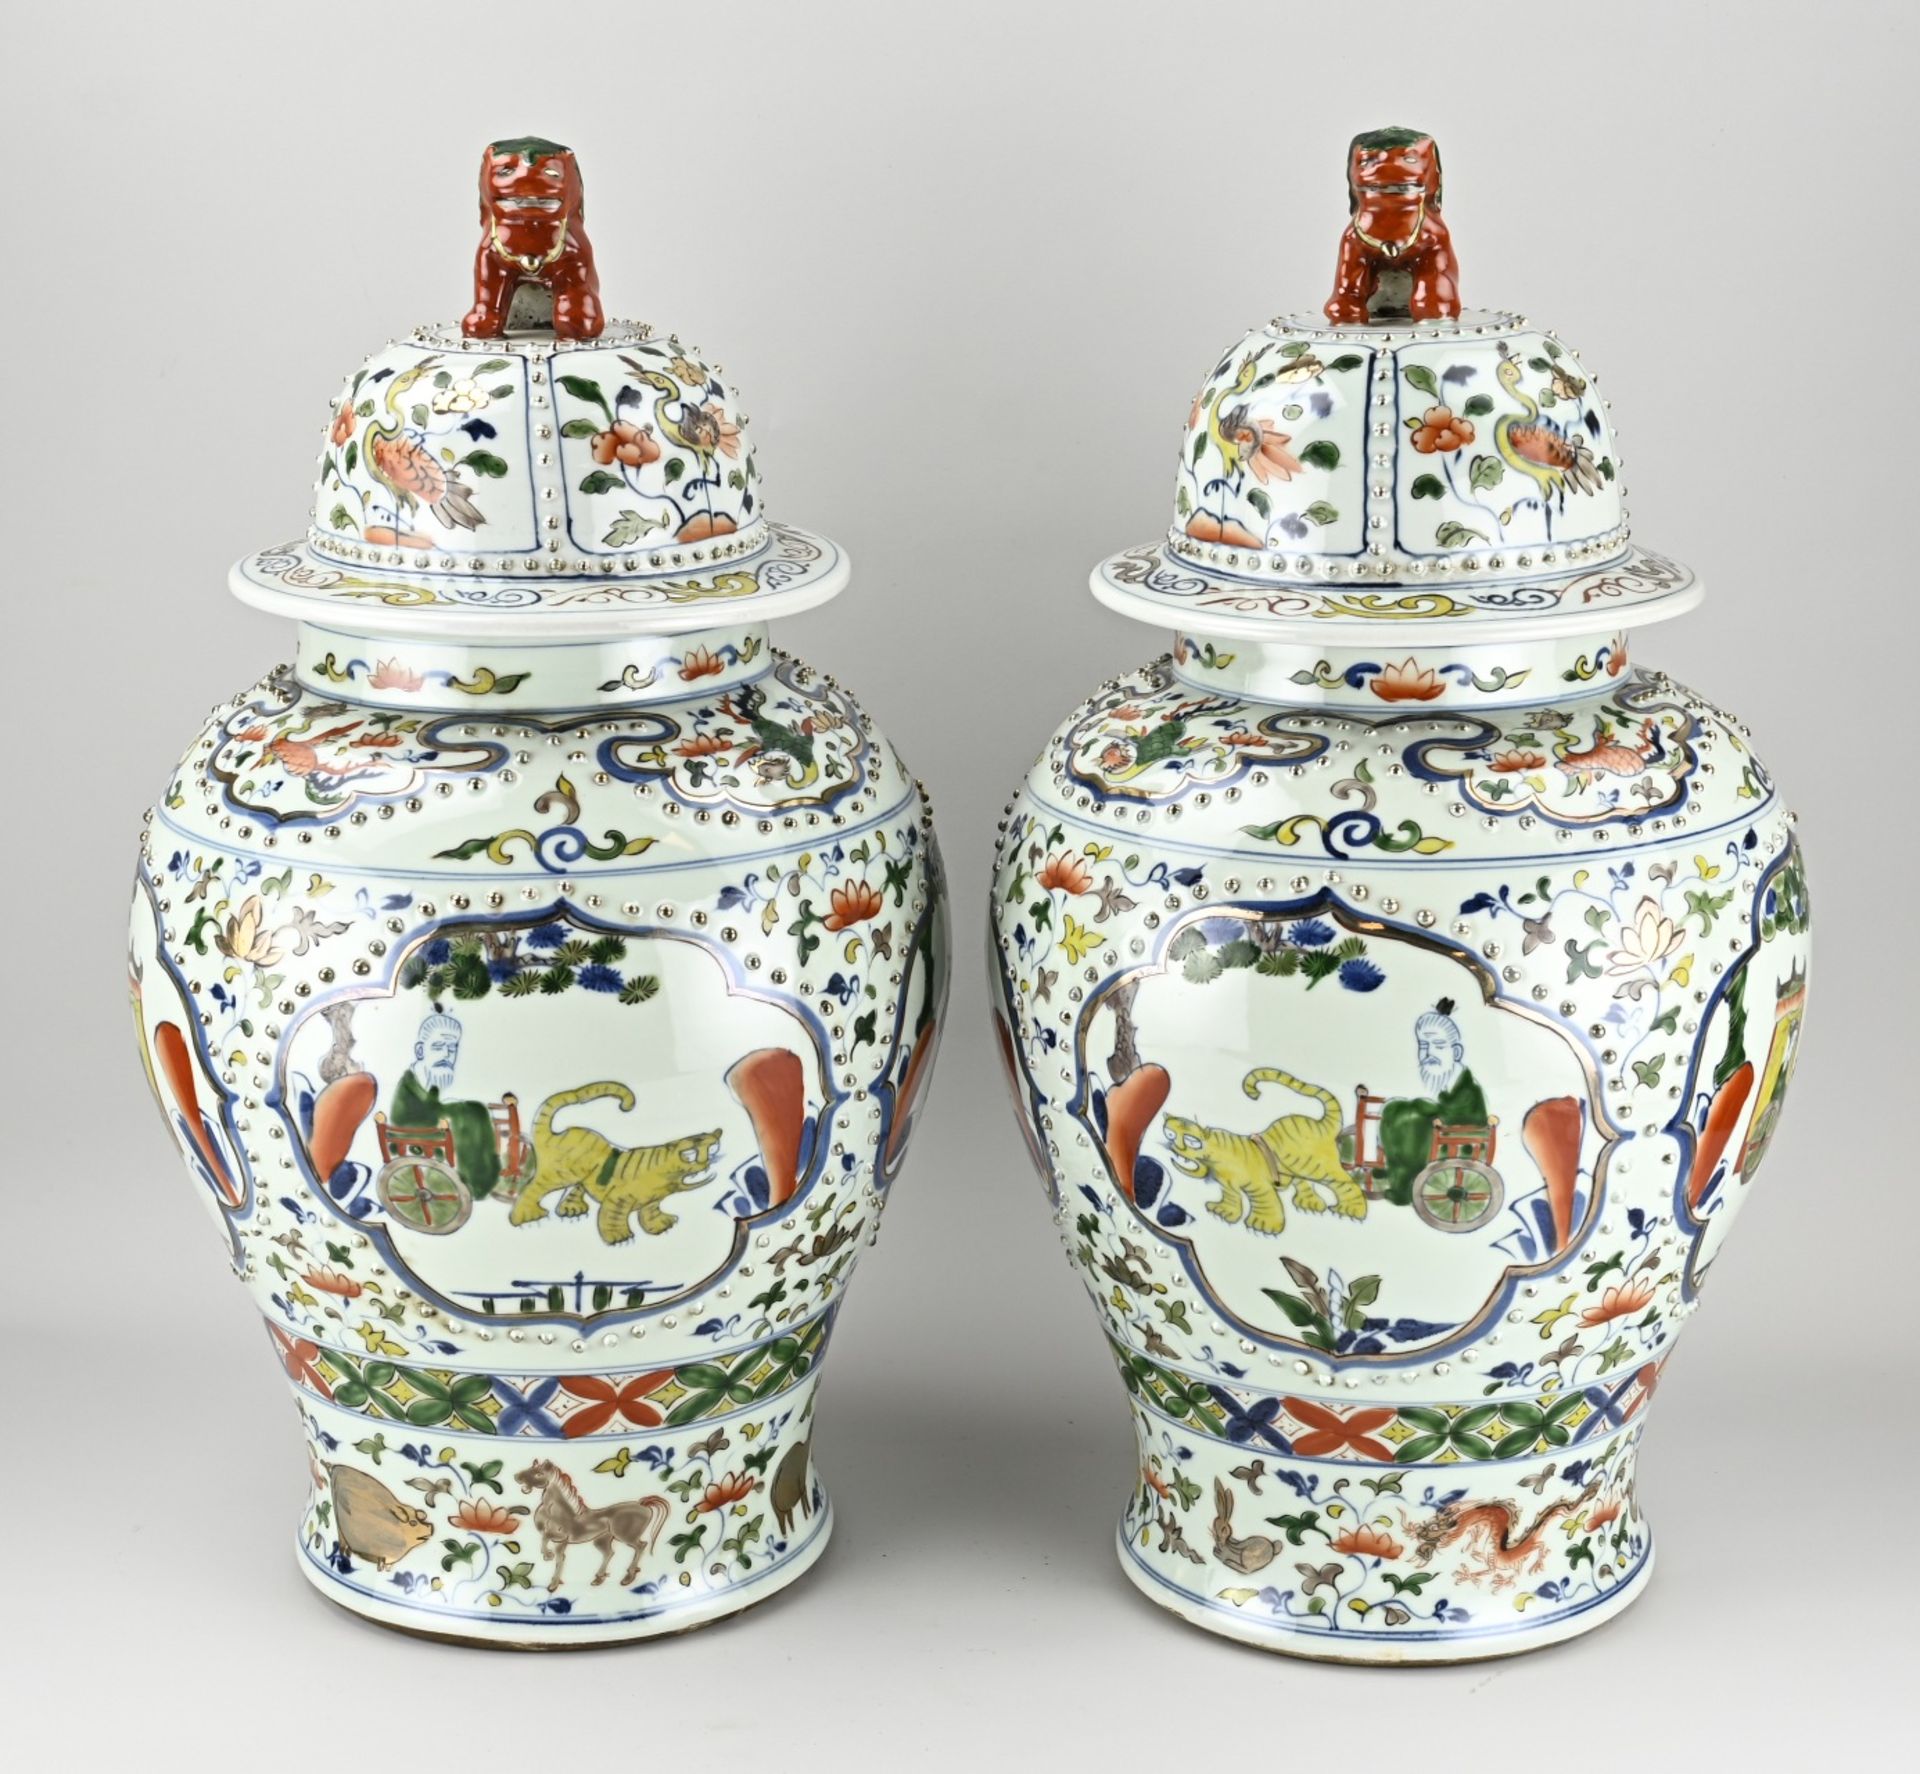 Two Chinese lidded vases, H 59 cm. - Image 2 of 3